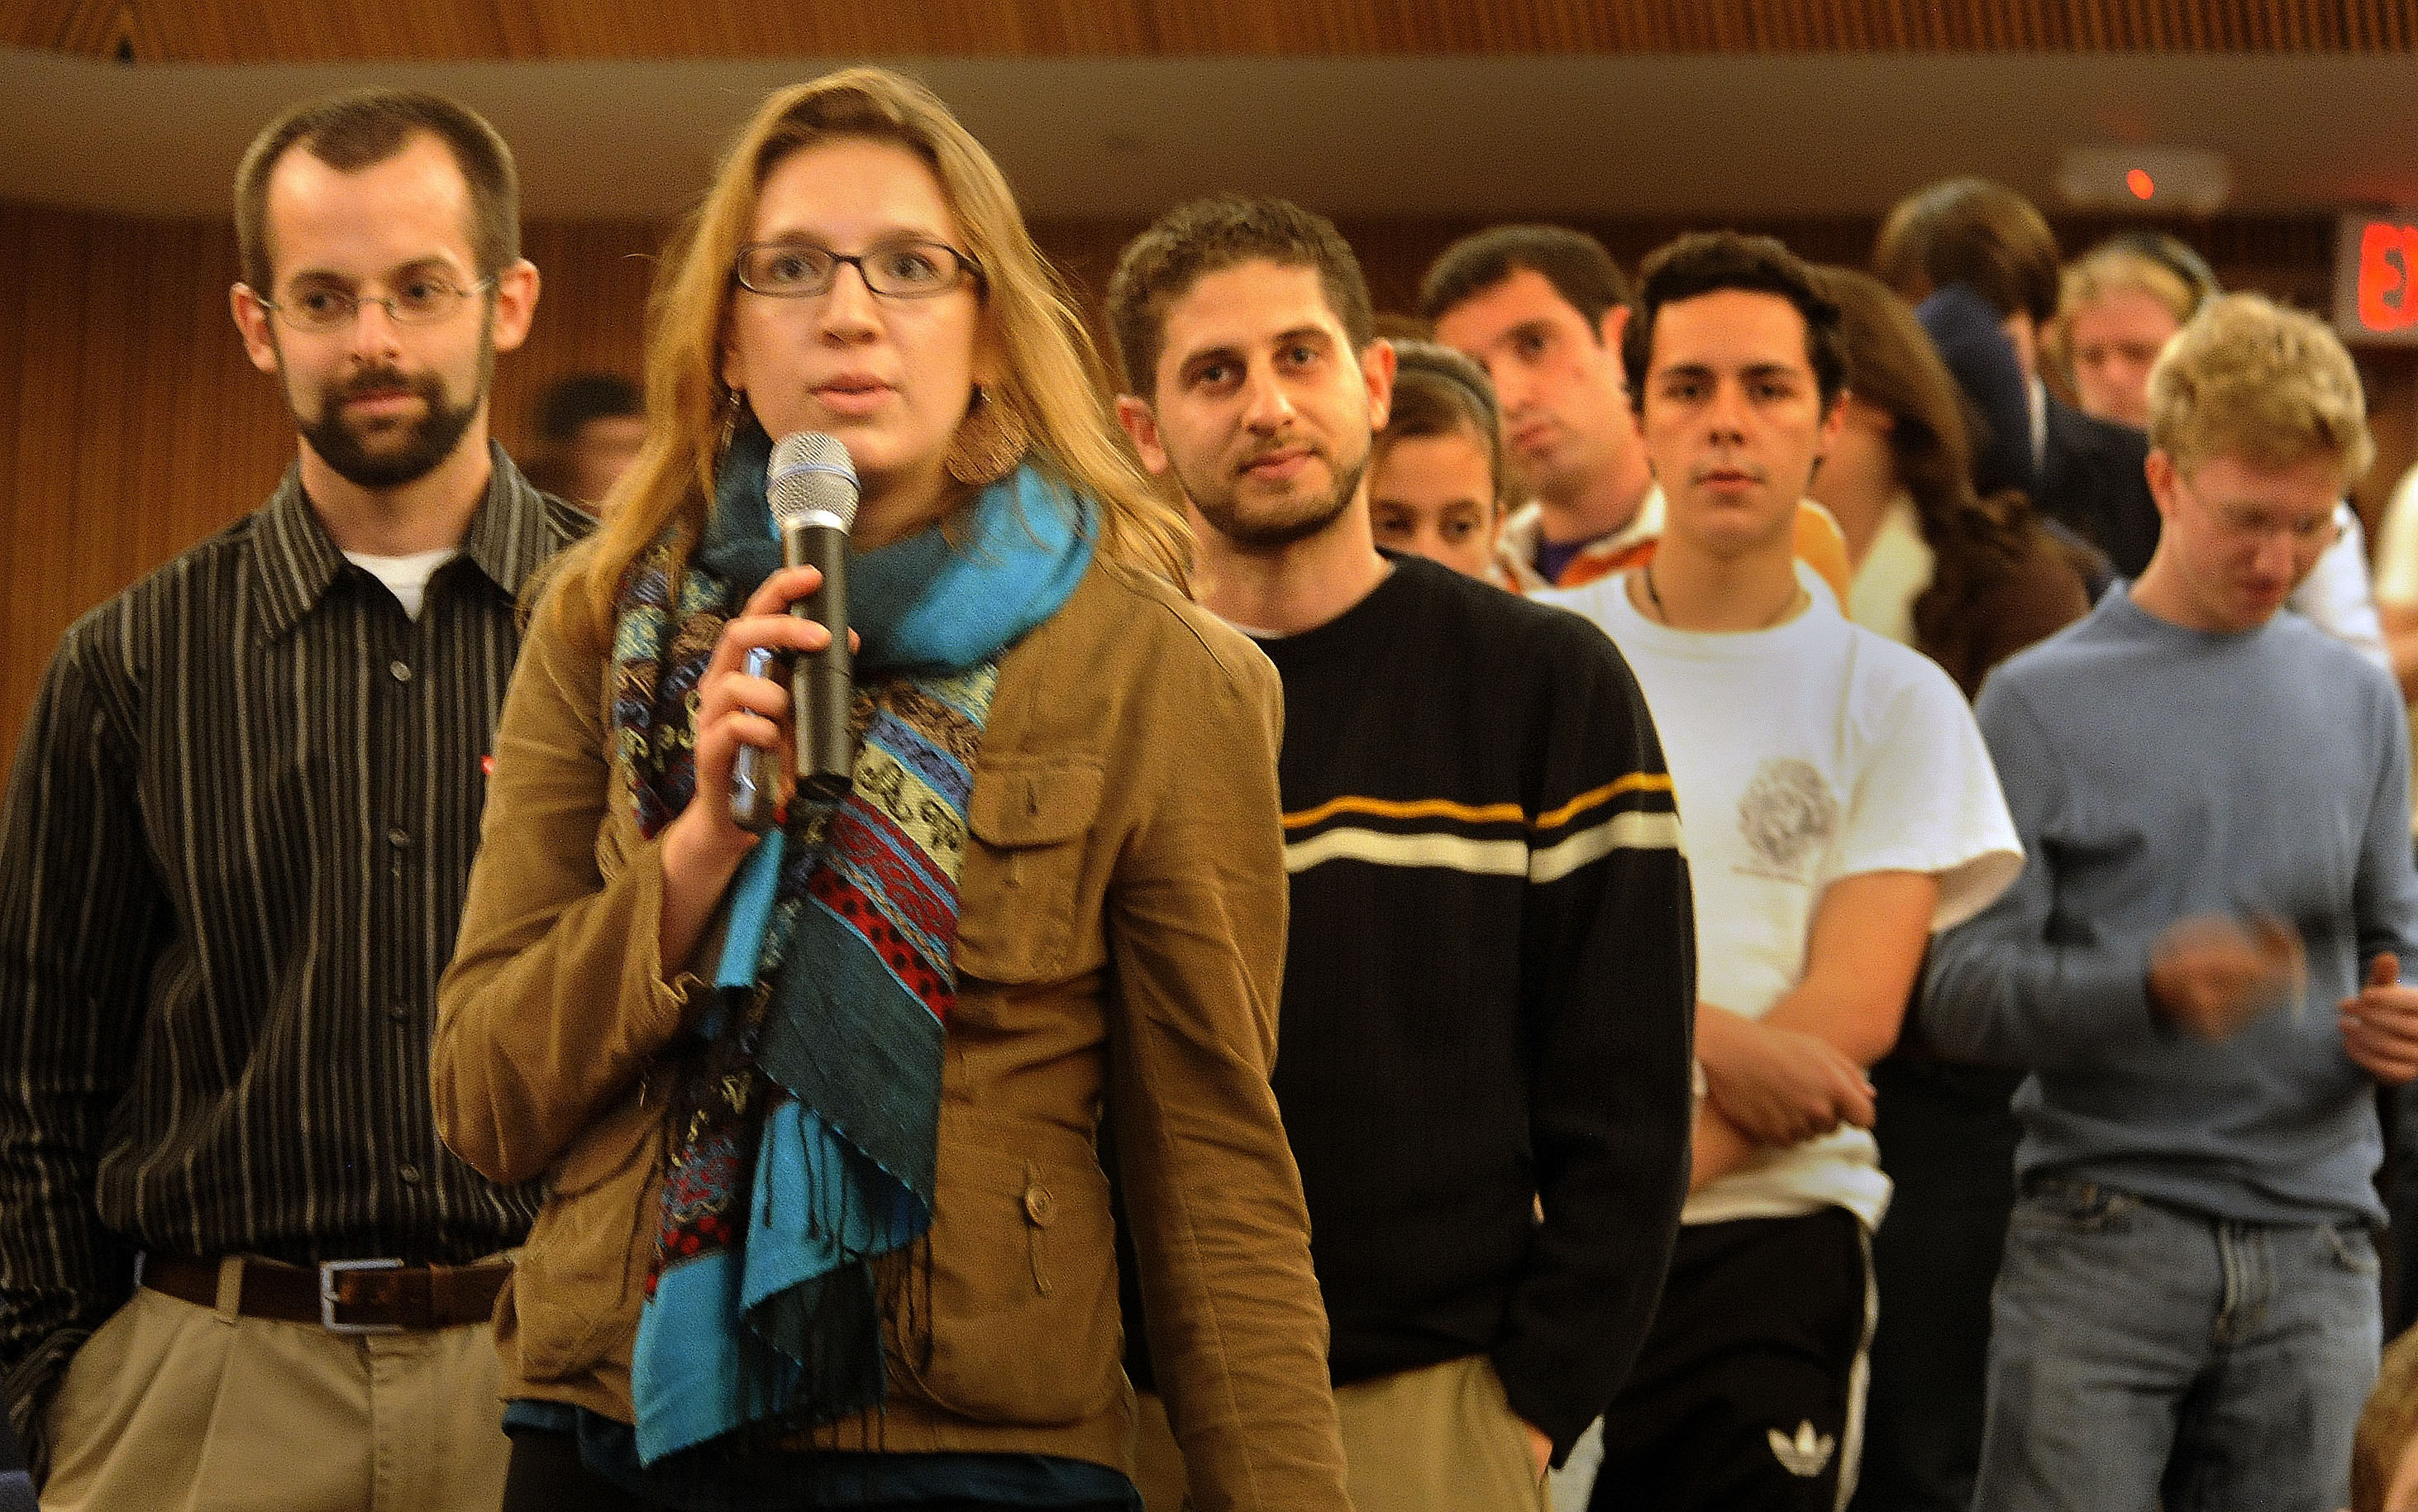 Georgetown University students line up to ask questions of Juicy Campus founder Matt Ivester in 2008